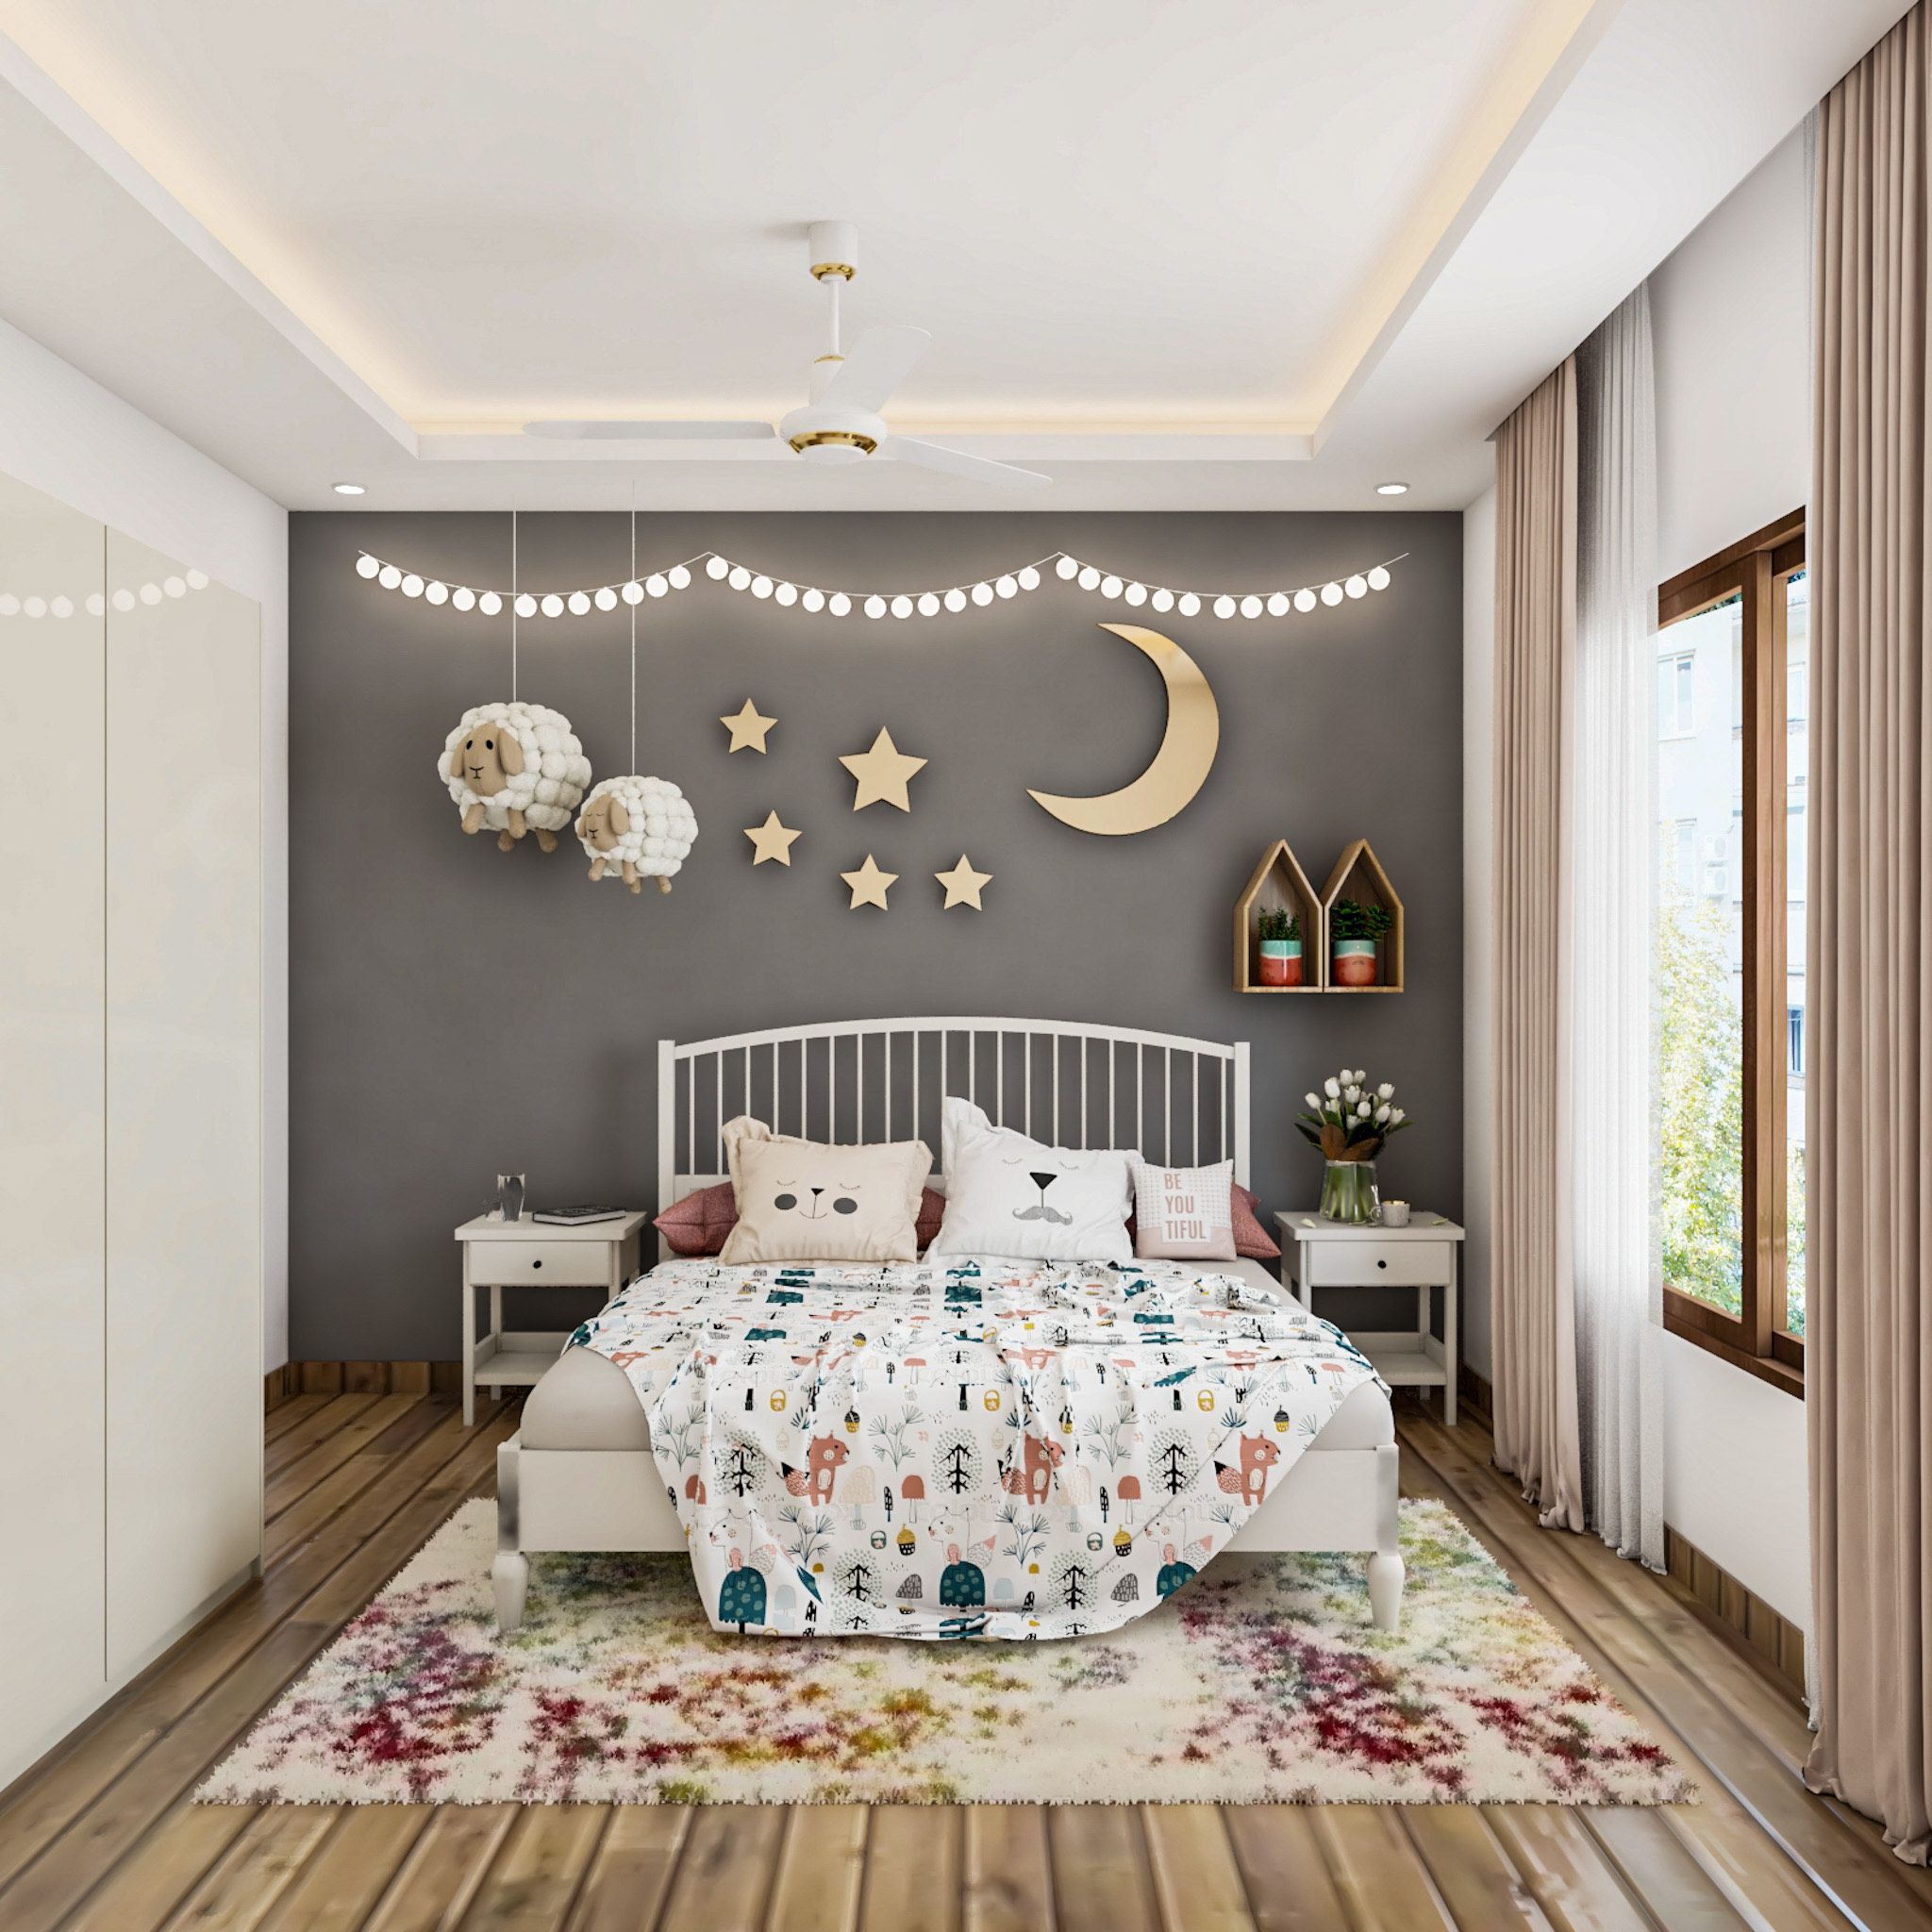 Modern Bedroom False Ceiling Design With A White Painted Finish